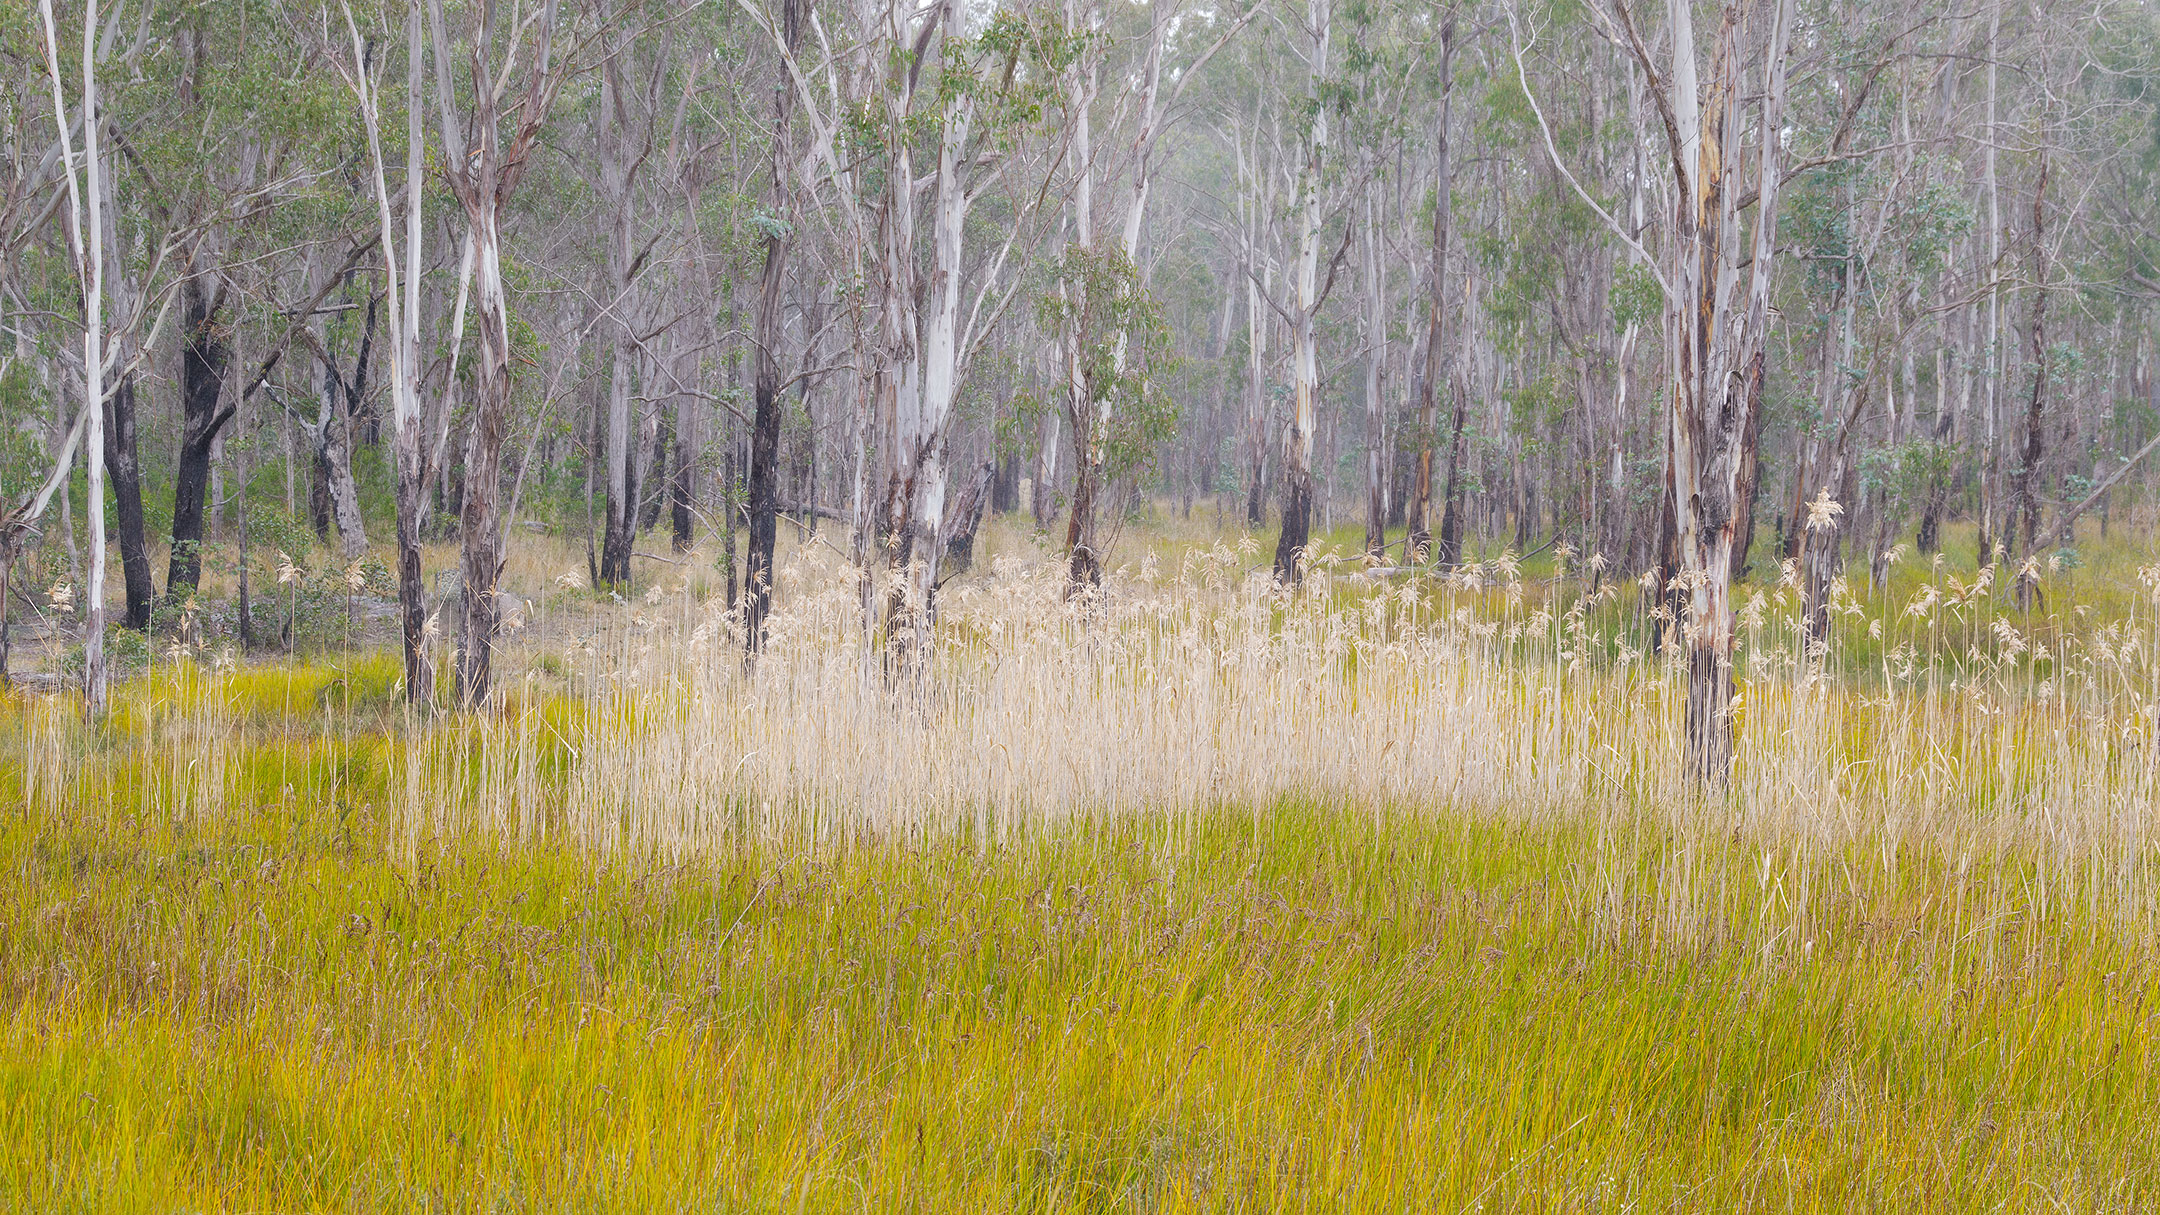 Mist spreads through a small billabong in the Australian outback of Bald Rock National Park